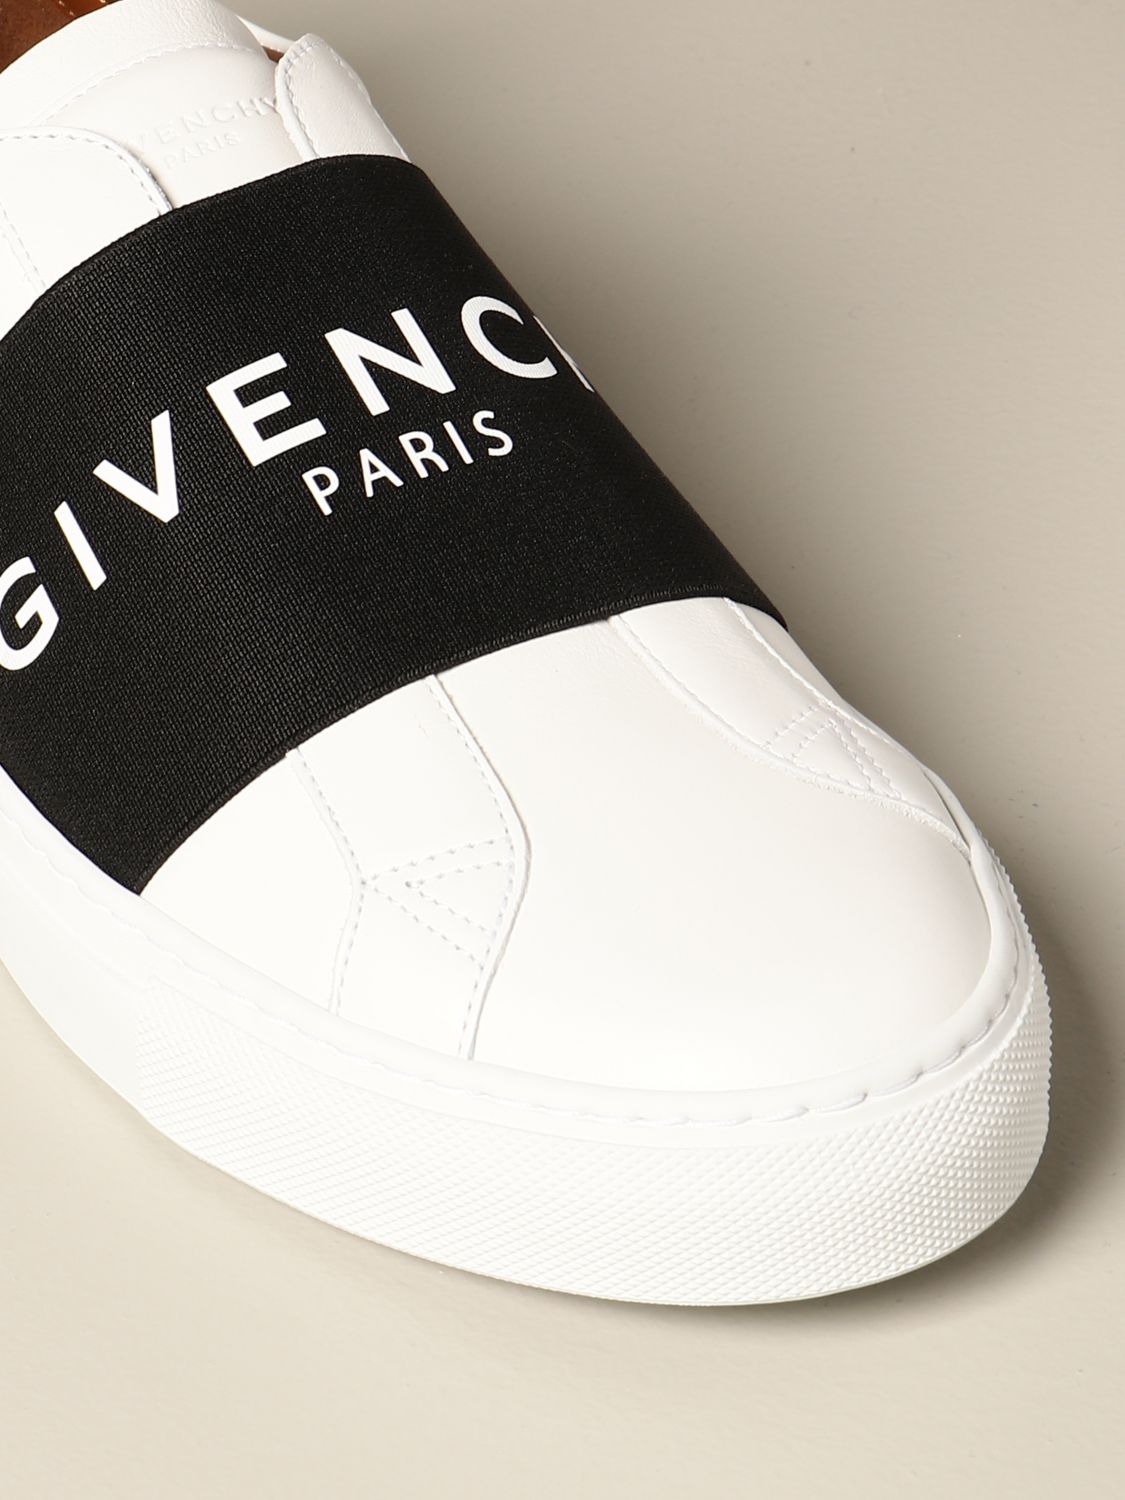 mens white givenchy trainers